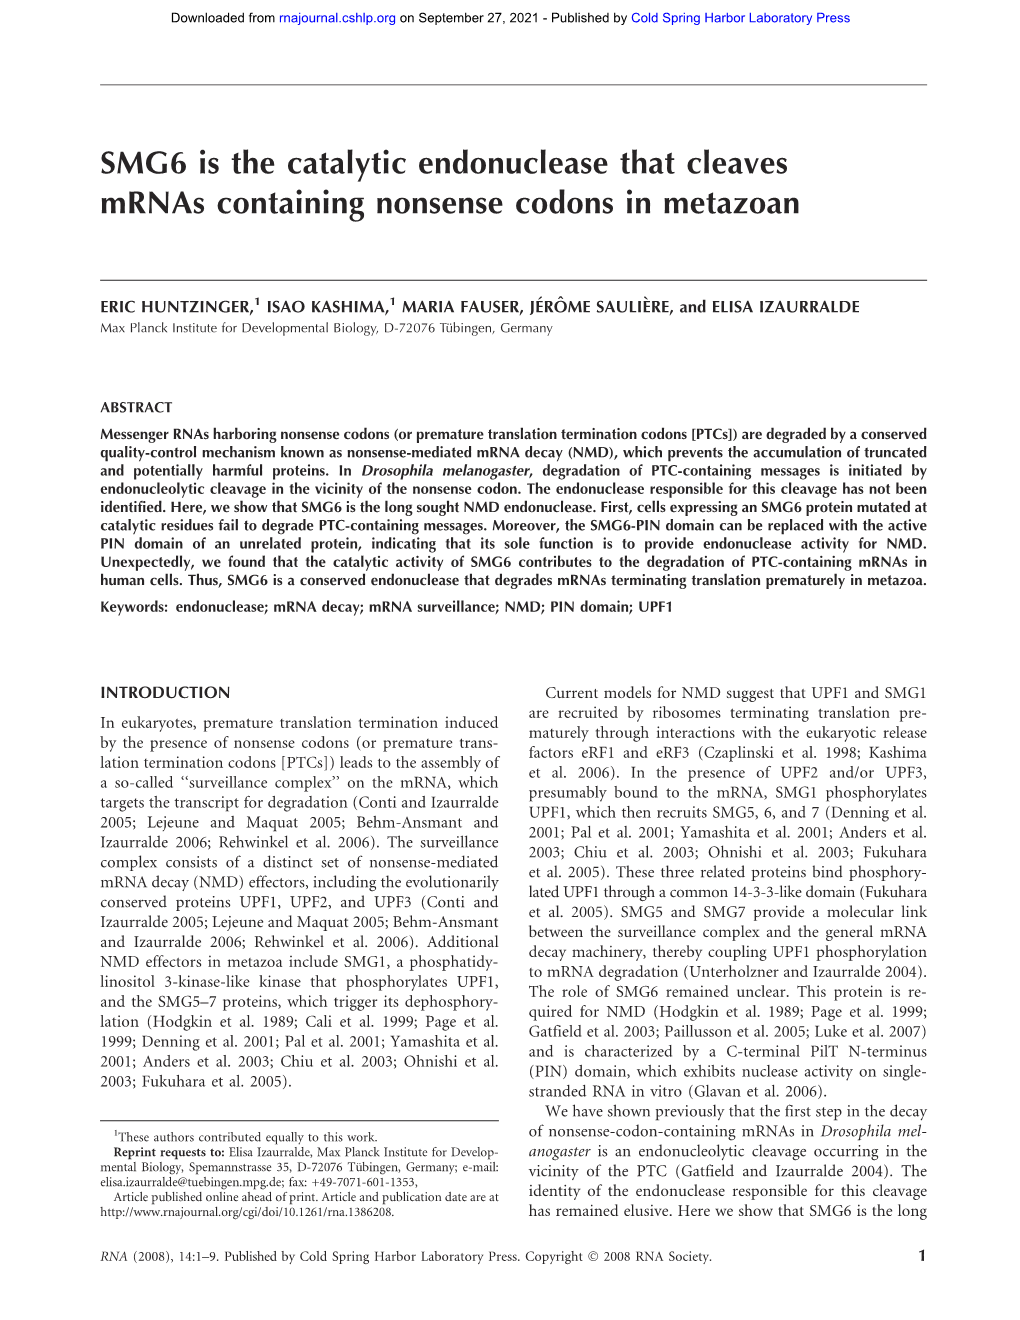 SMG6 Is the Catalytic Endonuclease That Cleaves Mrnas Containing Nonsense Codons in Metazoan